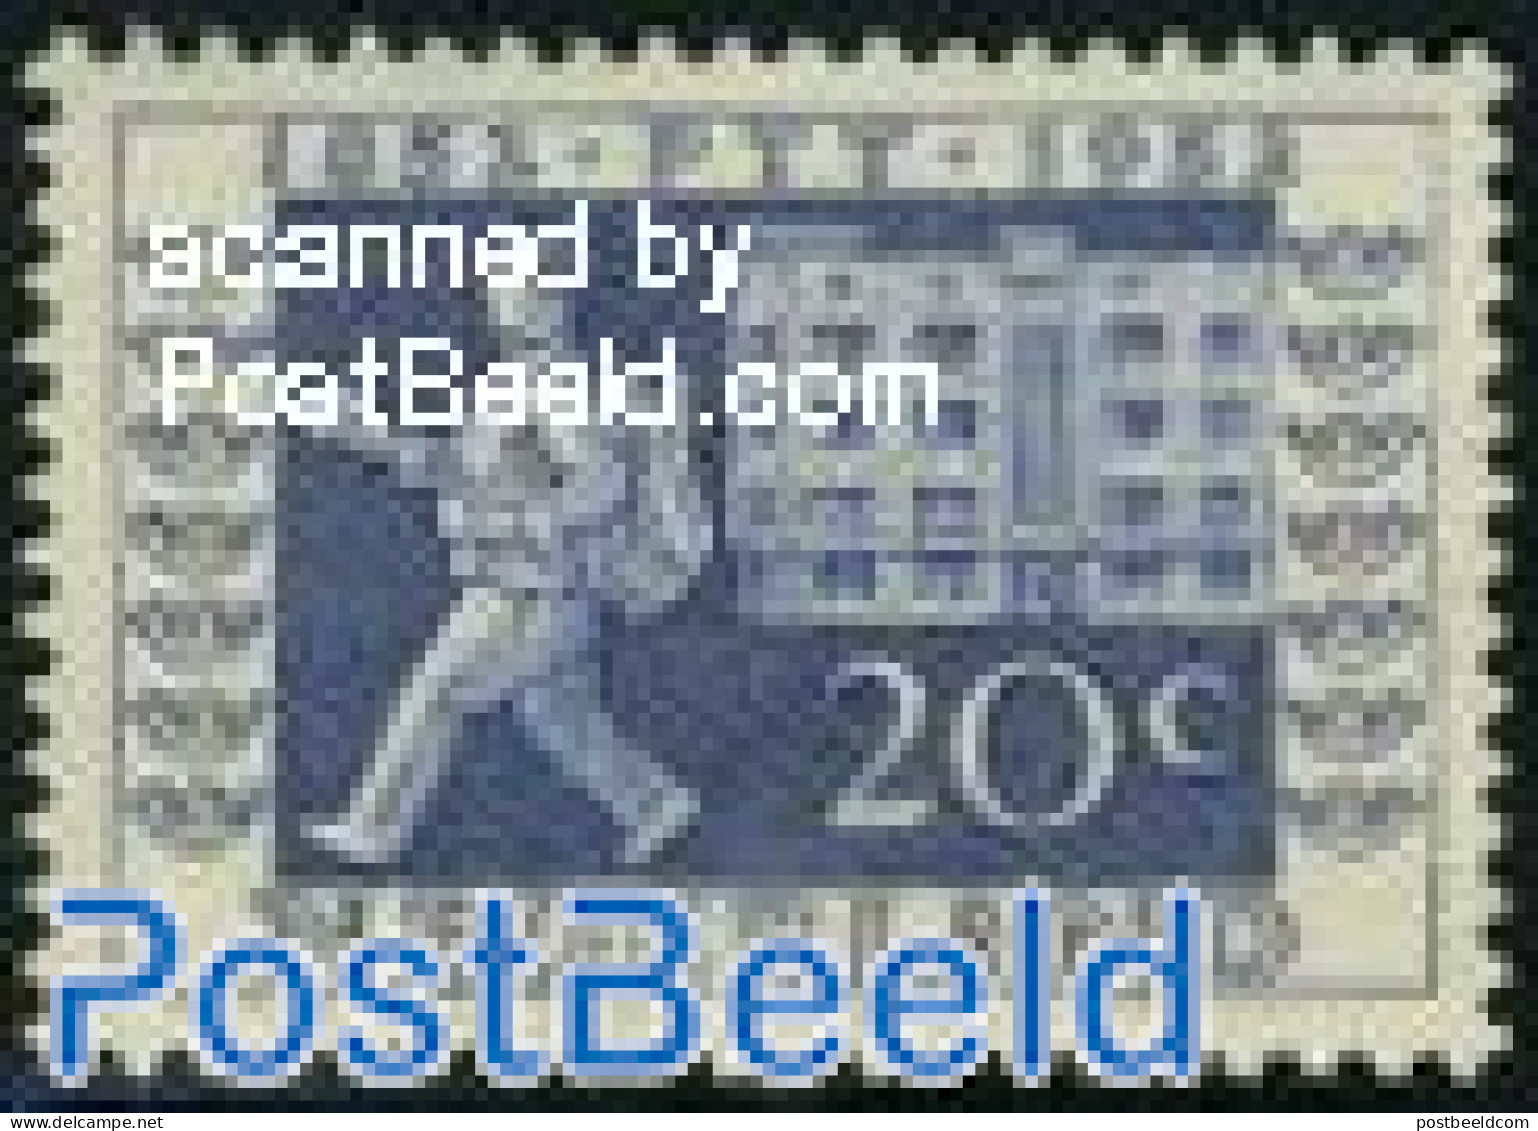 Netherlands 1952 20c Post In 1952, Stamp Out Of Set, Mint NH - Neufs